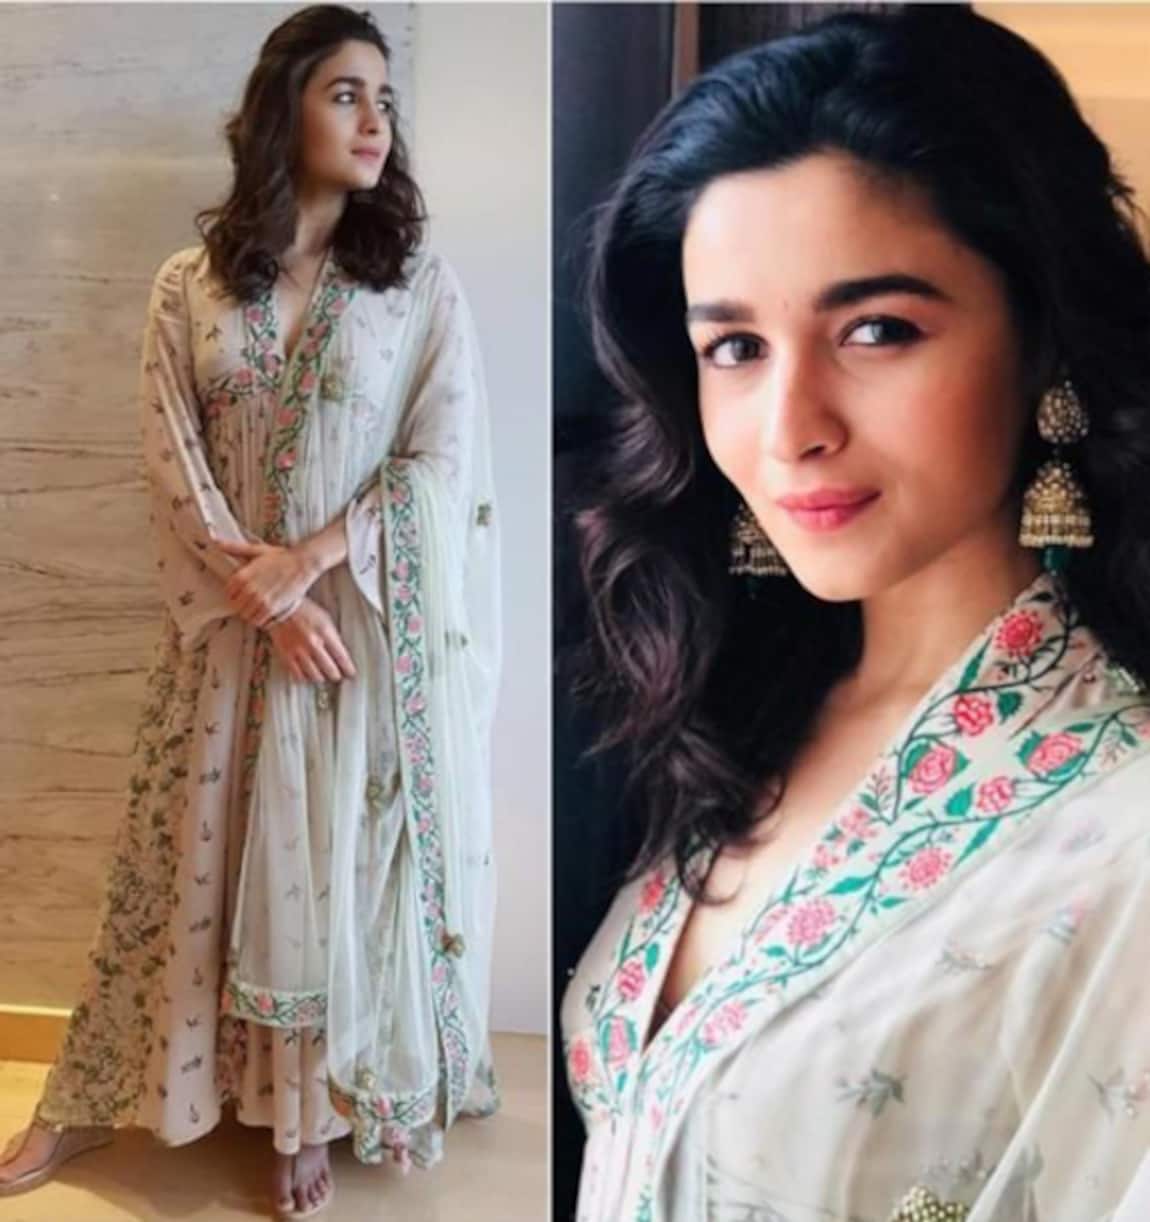 In love with the traditional white floral kurti style? Take vogue cues from  'gorgeous trio' Alia Bhatt, Kriti Sanon and Disha Patani